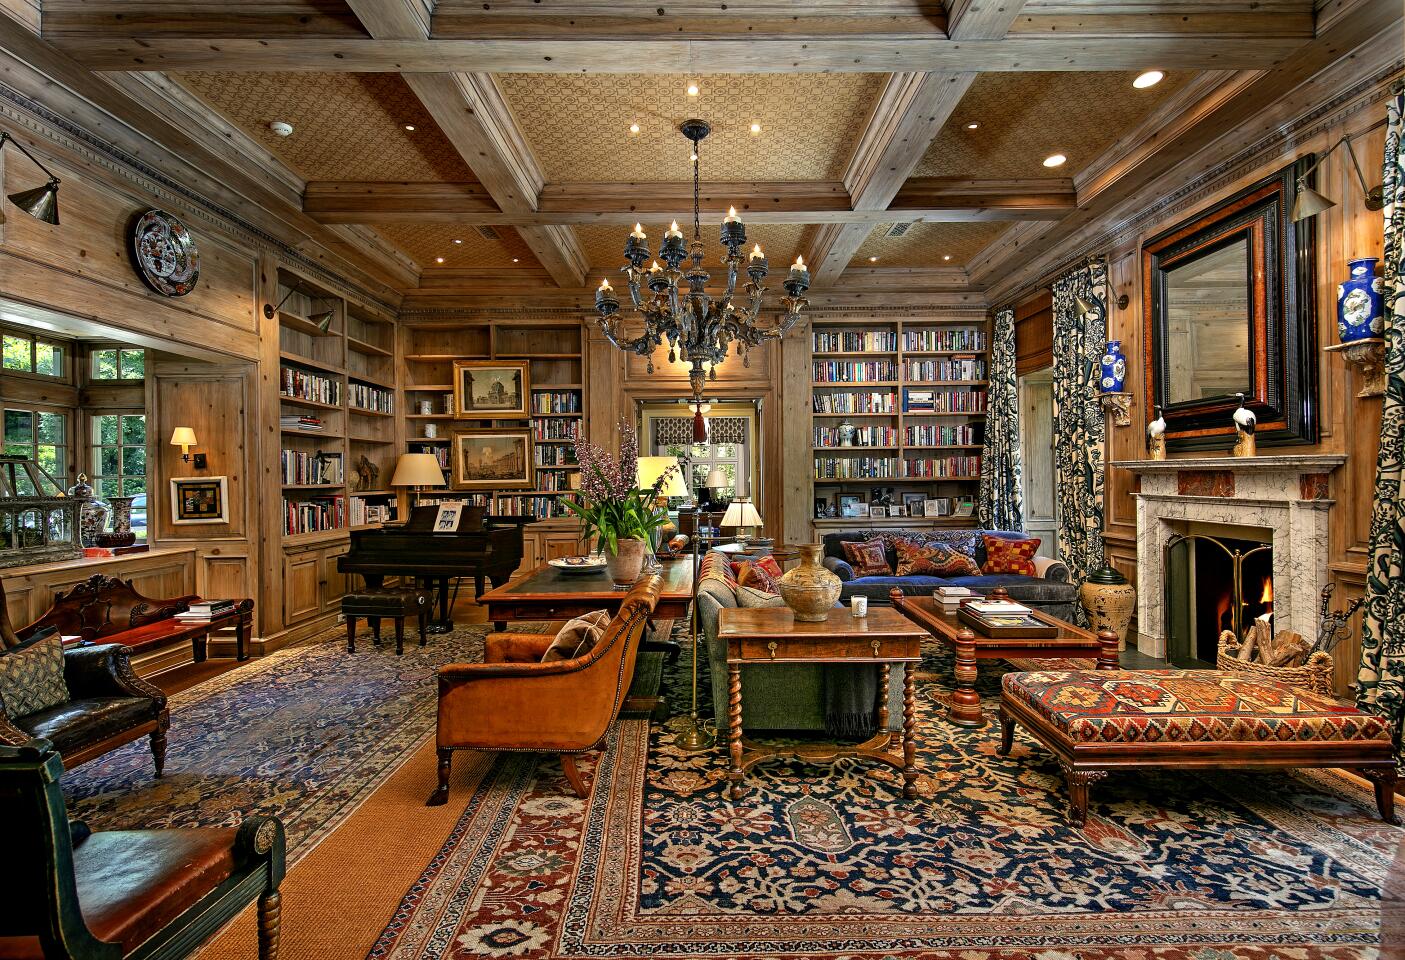 Living room with a fireplace, furniture and filled bookshelves.